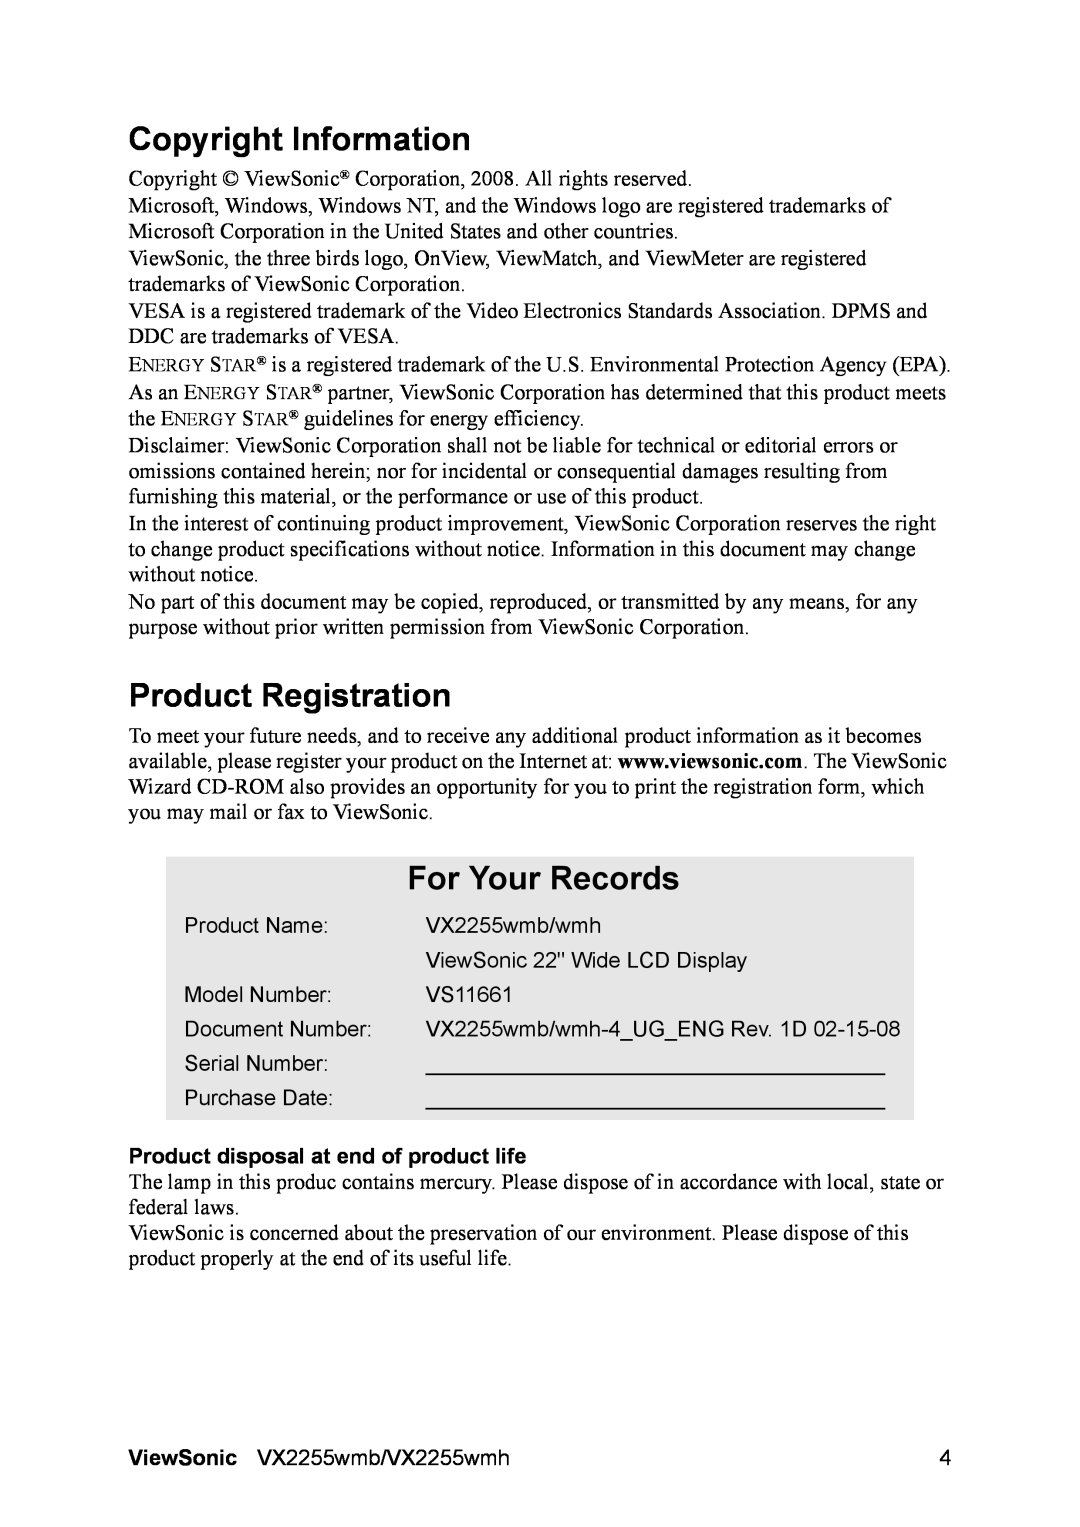 ViewSonic VS11661 Copyright Information, Product Registration, For Your Records, Product disposal at end of product life 